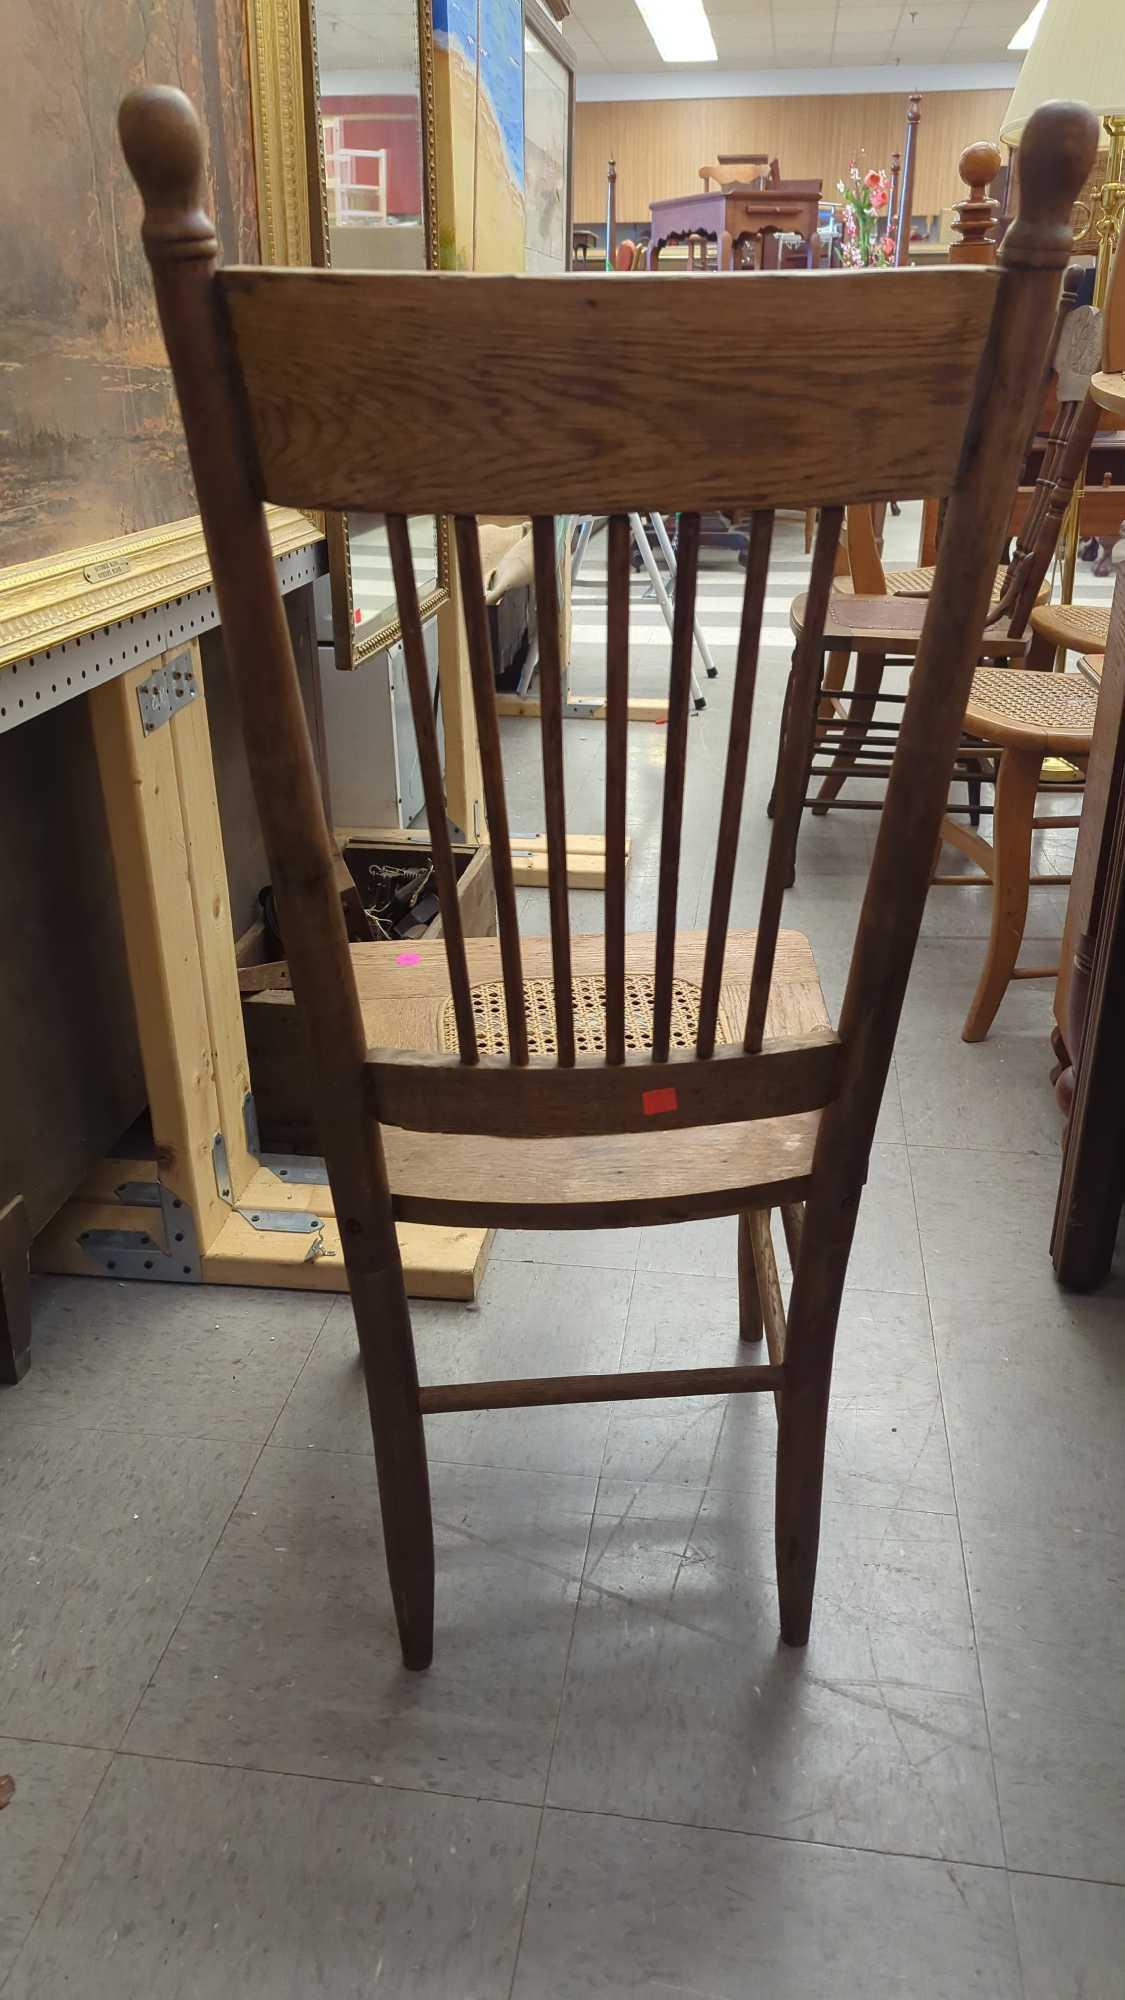 EARLY STYLE WOODEN PRESS BACK DINING CHAIR WITH A WICKER BOTTOM MEASURES APPROXIMATELY 17 IN X 15 IN